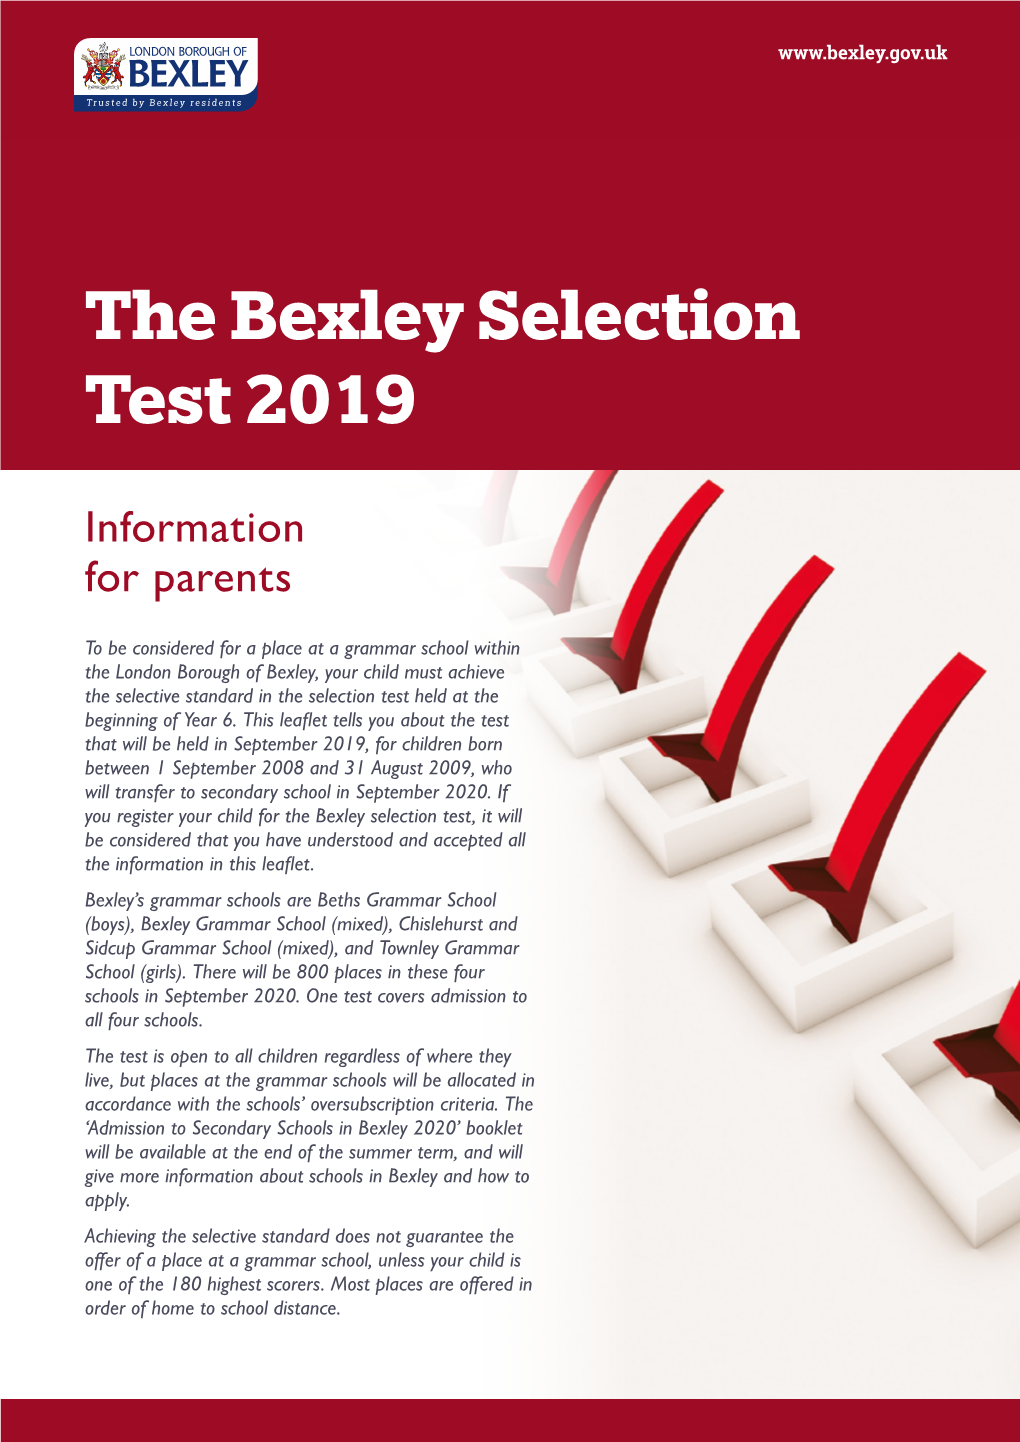 Information About the Bexley Selection Test 2019